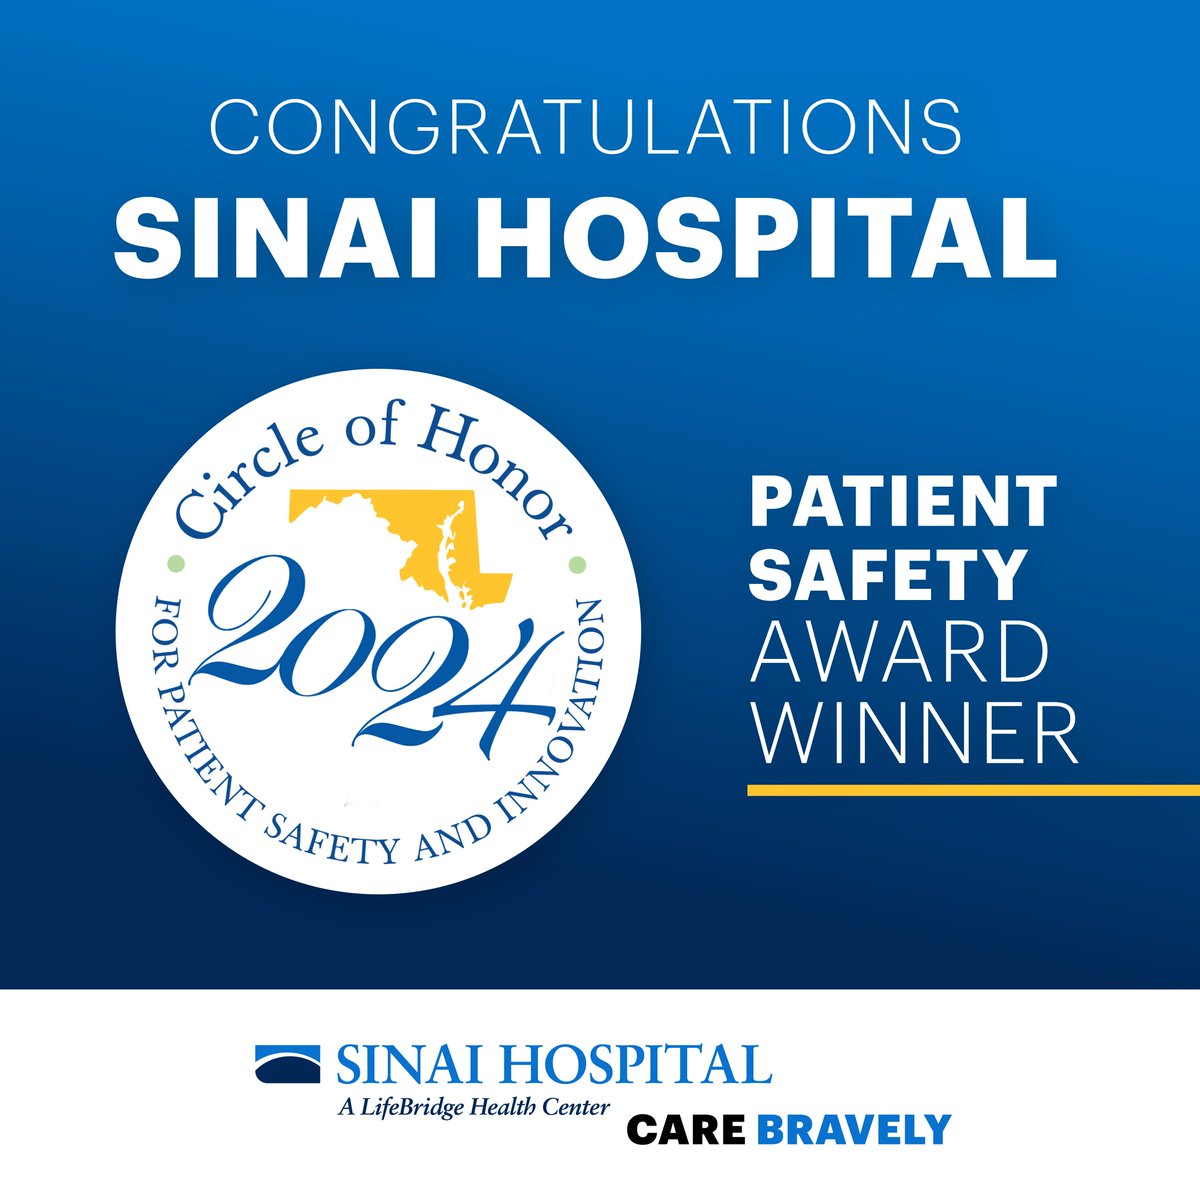 We're thrilled to announce that Sinai Hospital has been honored with THREE Circle of Honor awards from @MDPatientSafety.  🏆🏆🏆 This incredible recognition underscores our unwavering commitment to ensuring the safety and well-being of every patient. #LifeBridgeHealth #Caring4MD